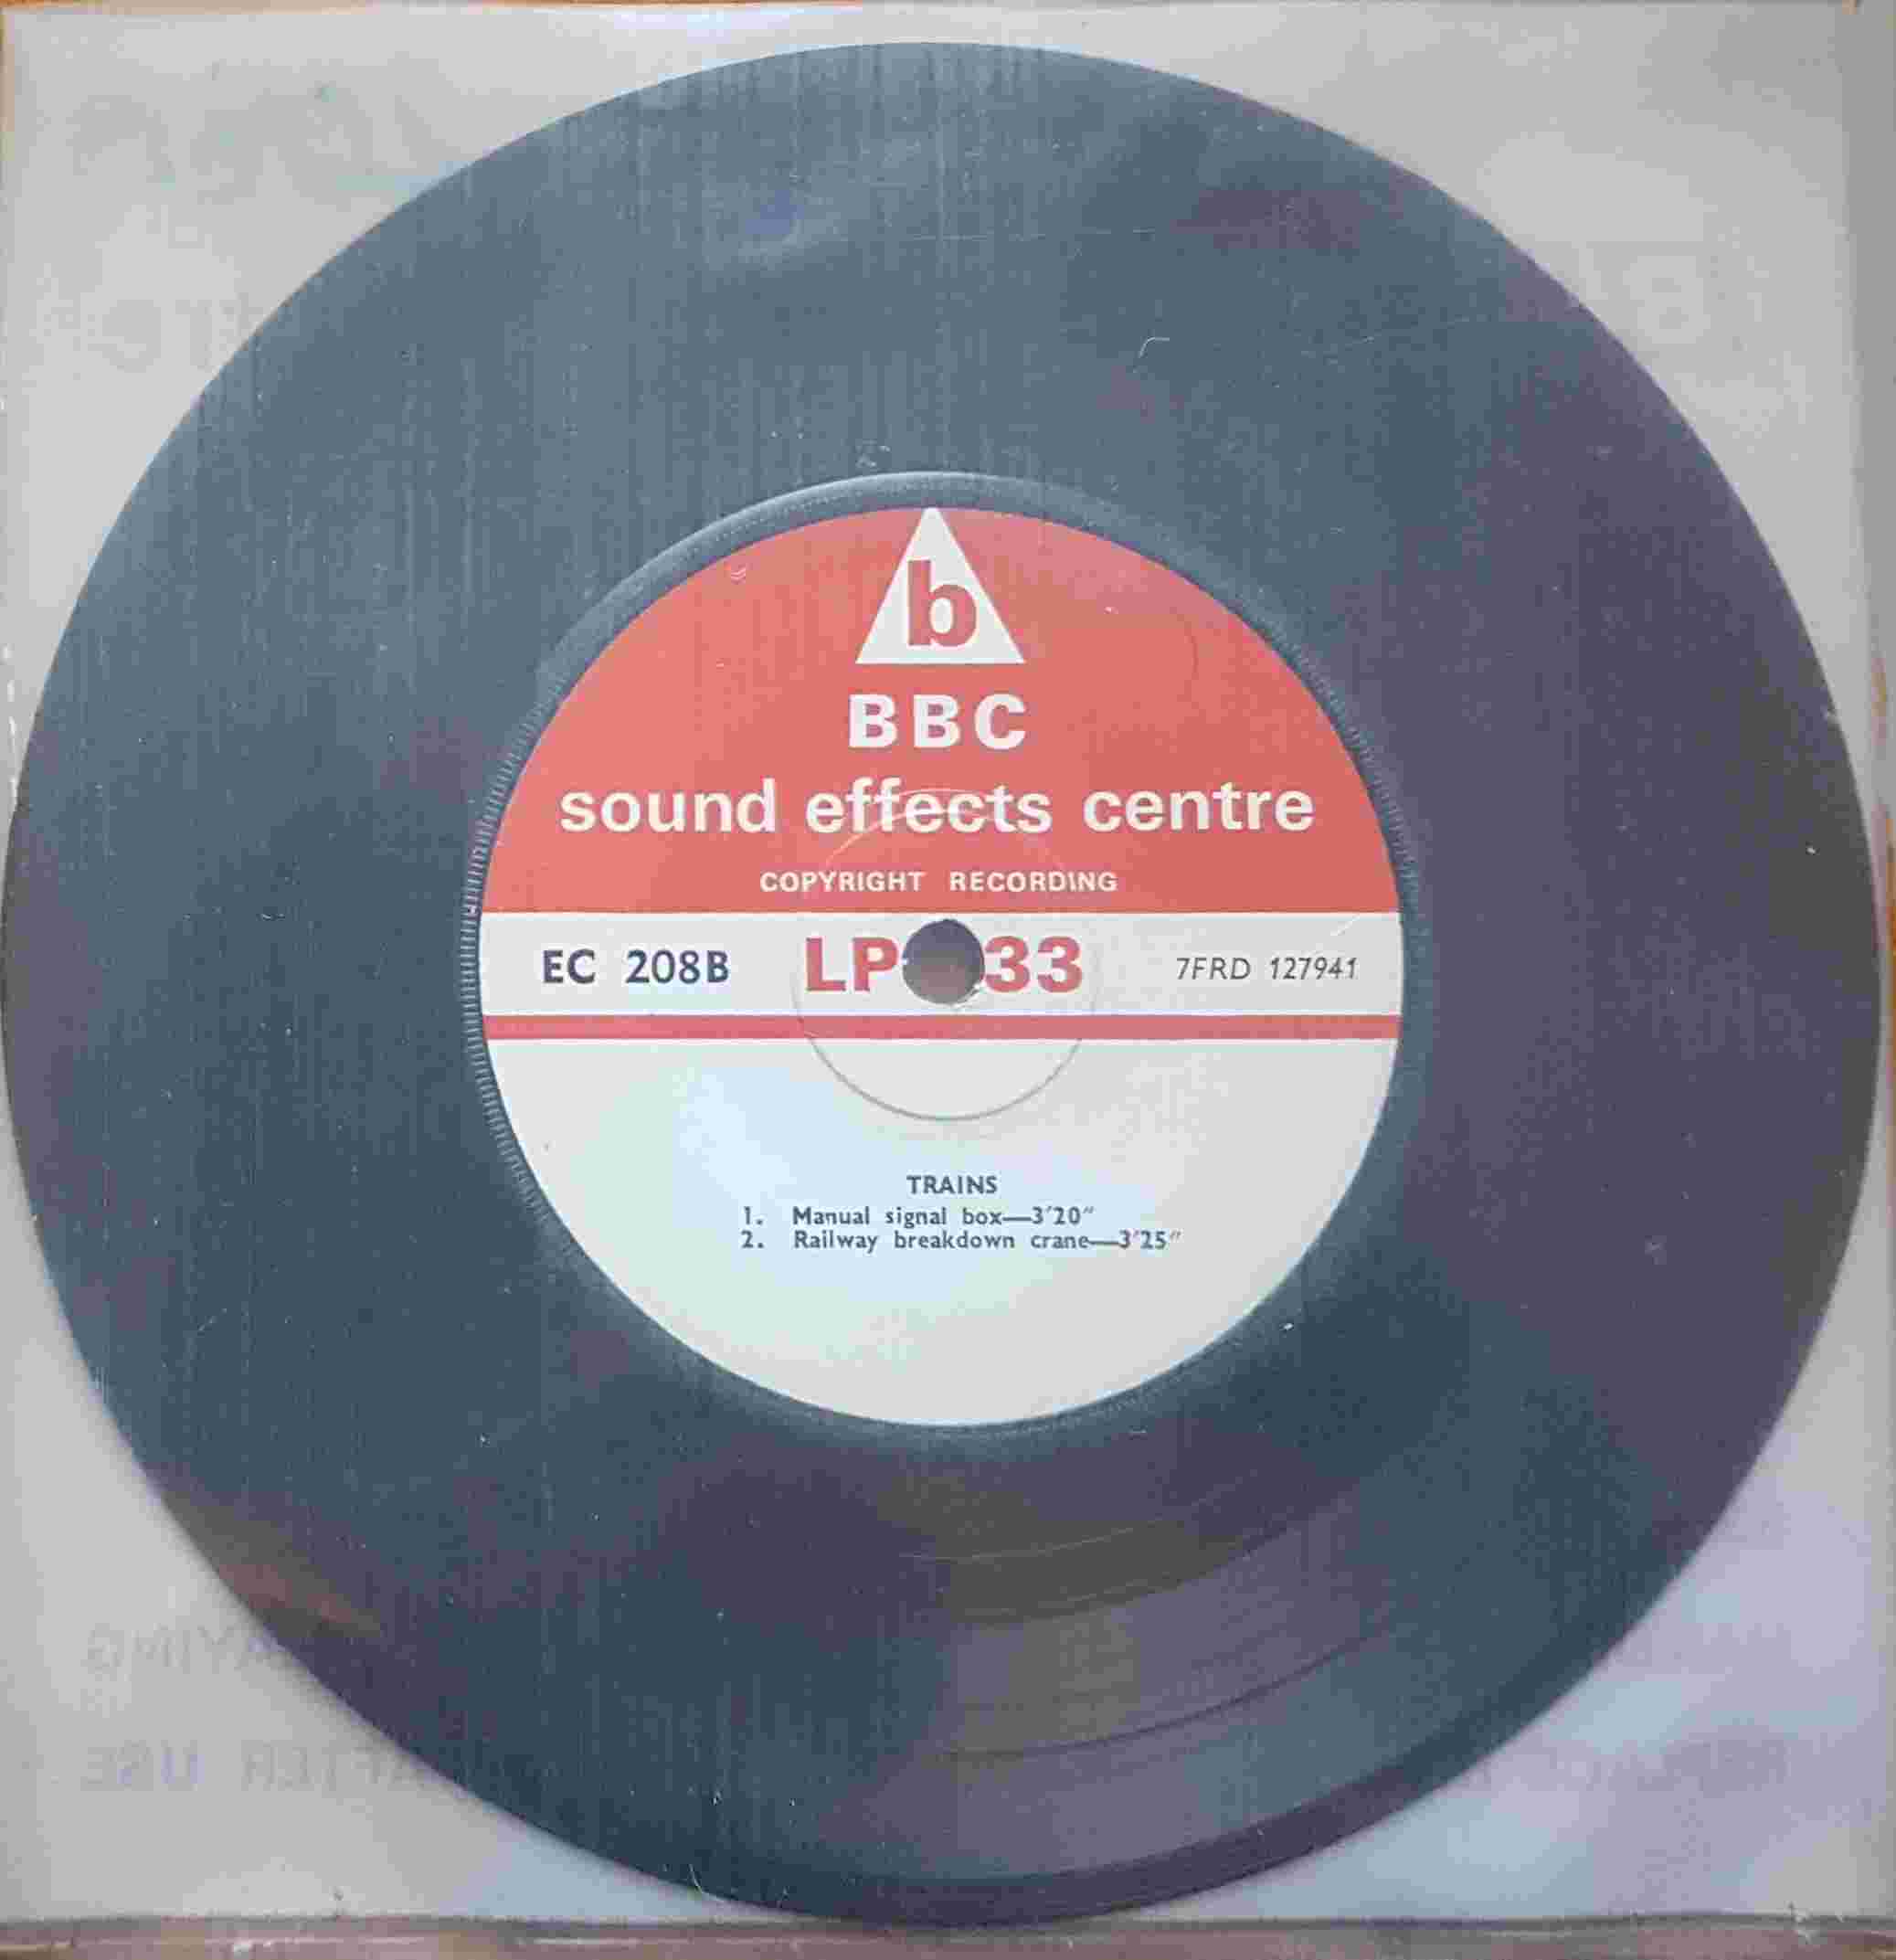 Picture of EC 208B Trains by artist Not registered from the BBC records and Tapes library